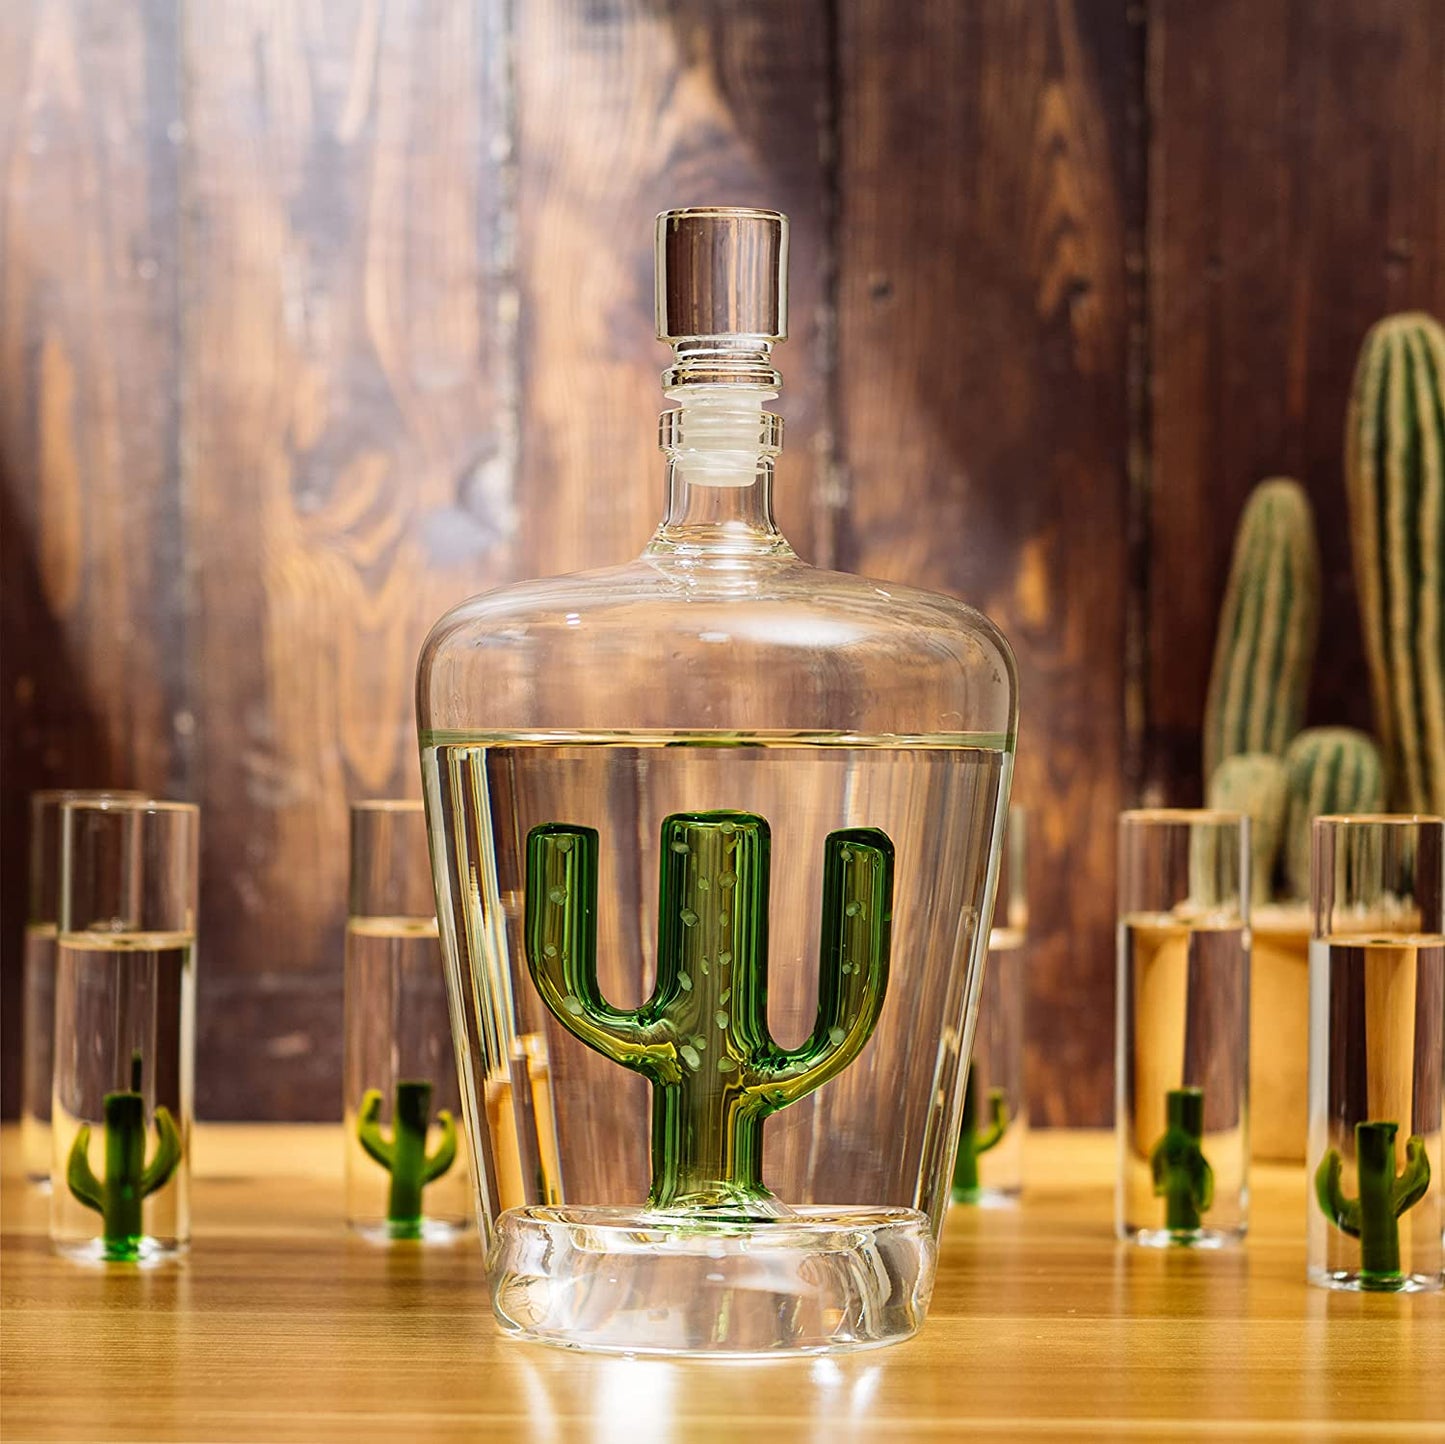 Tequila Decanter Set With Agave Decanter and 6 Agave Shot Glasses, Perfect For Any Bar Or Tequila Party, 25 Ounce Bottle, 3 Ounce Tequila Shot Glasses (Cactus Tequila Set)-4